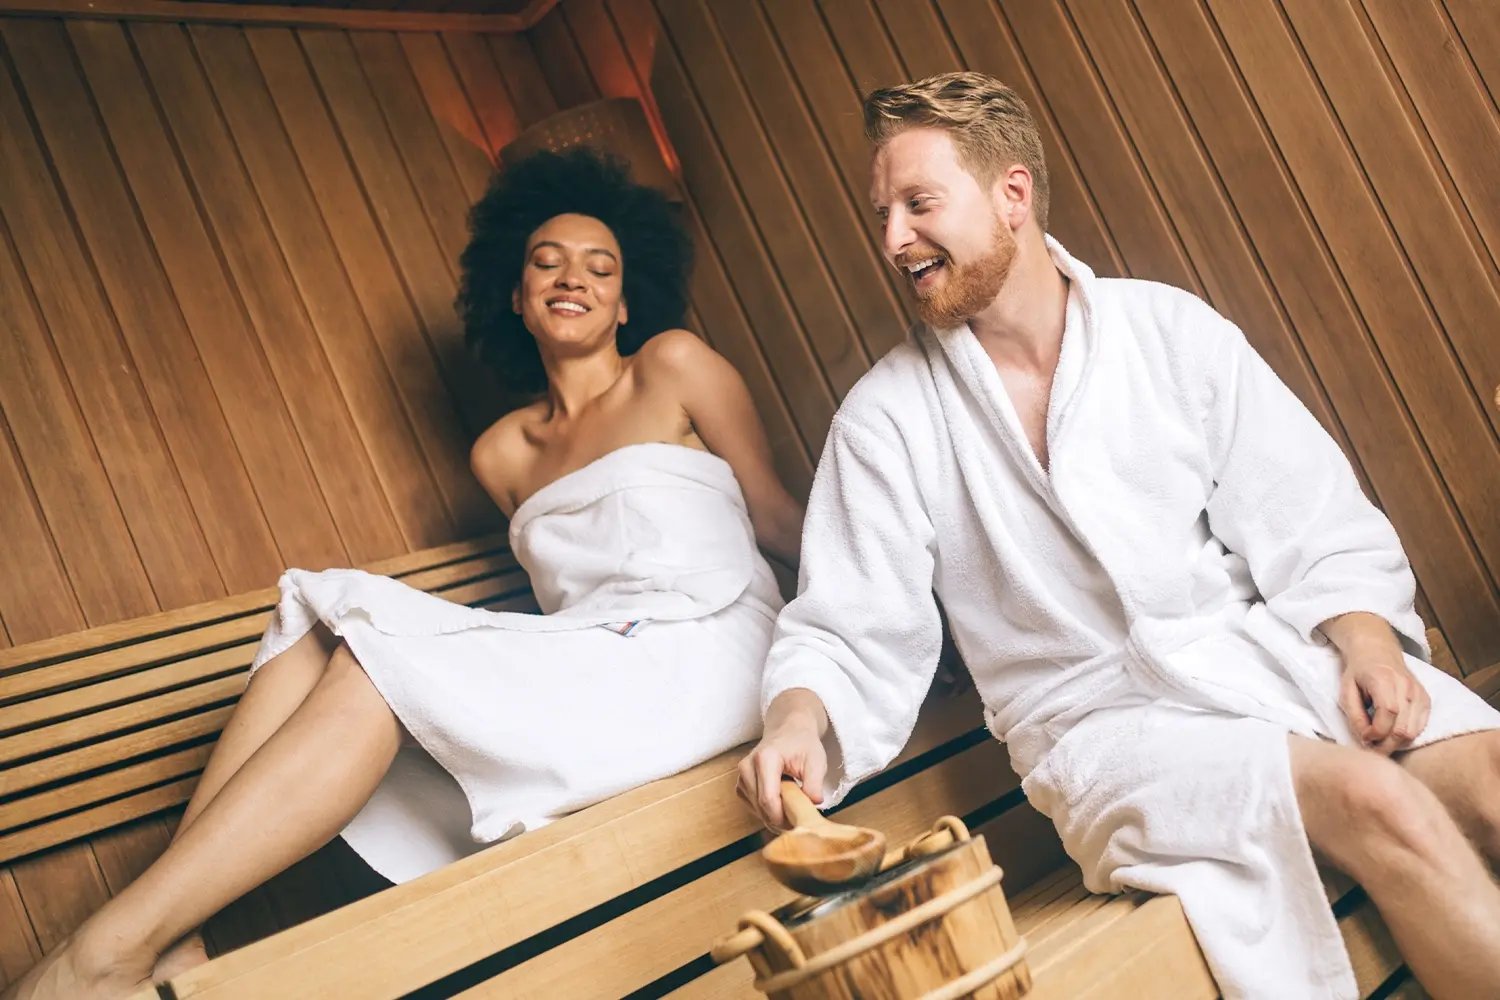 Sauna Health and Wellness Benefit: Social Connection